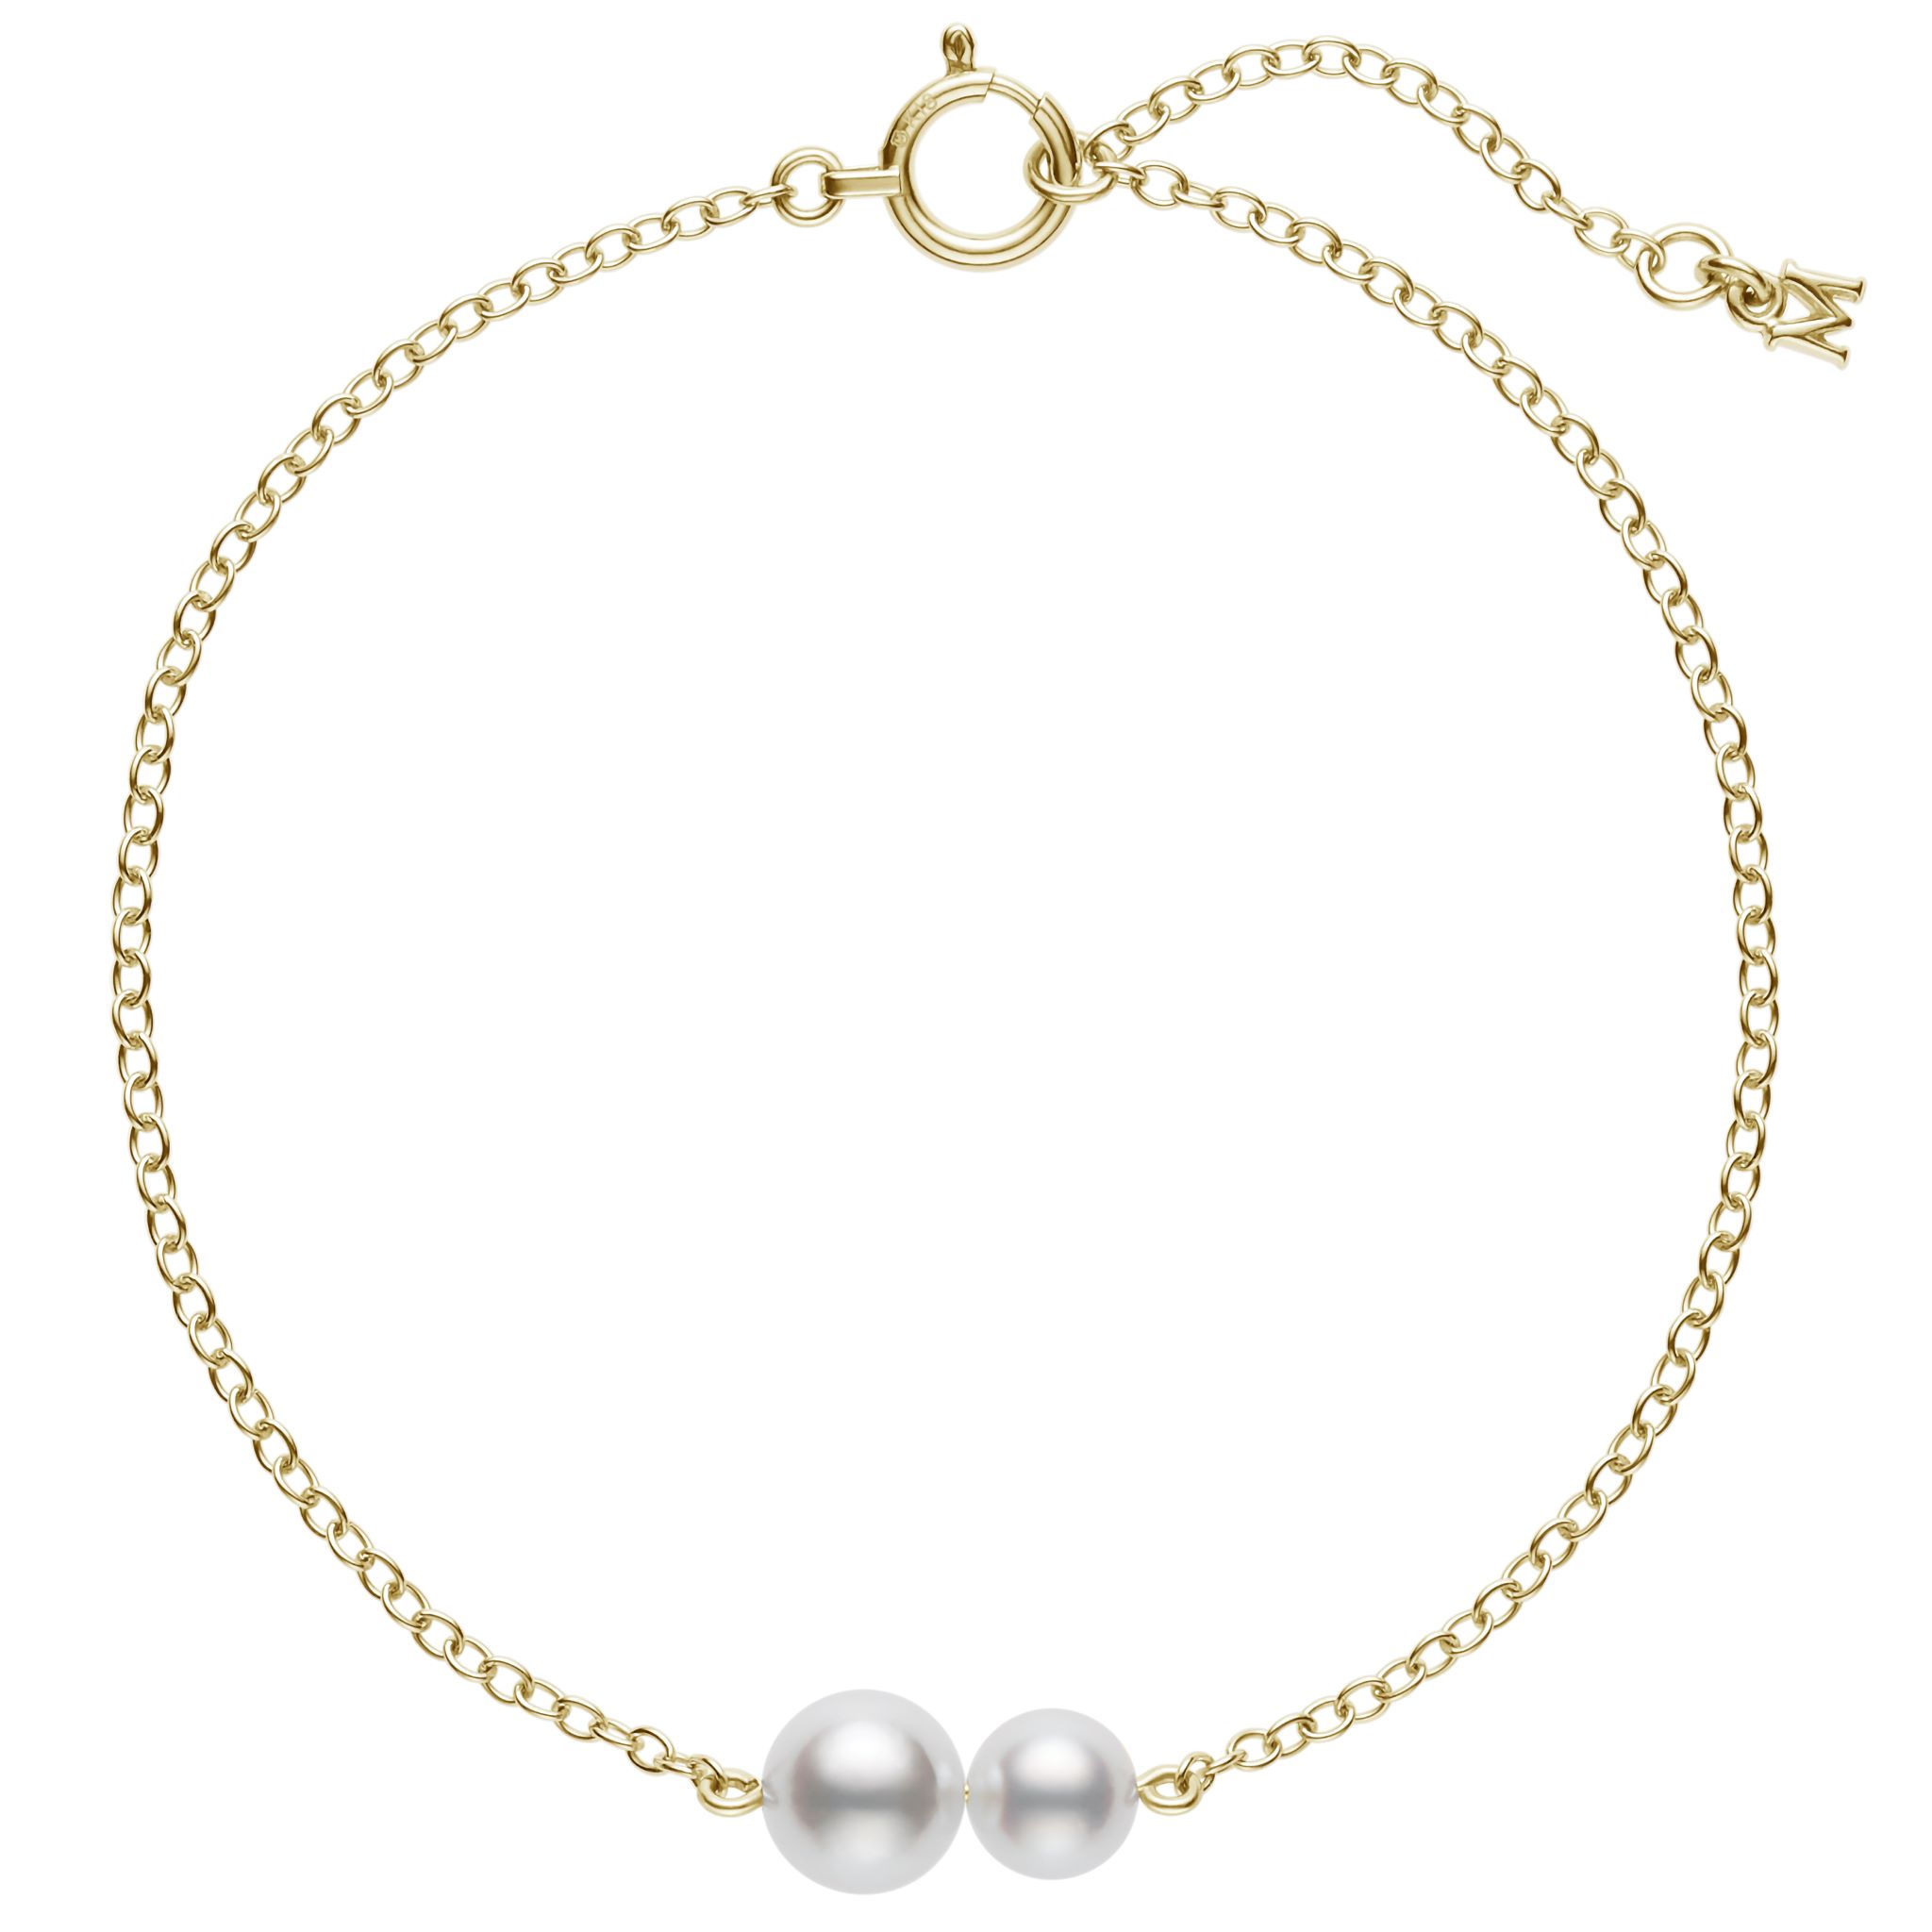 This pearl bracelet by Mikimoto is crafted from 18k yellow gold and features a 5mm white pearl and a 6mm white pearl. This bracelet is adjustable 6.25" or 7" long.